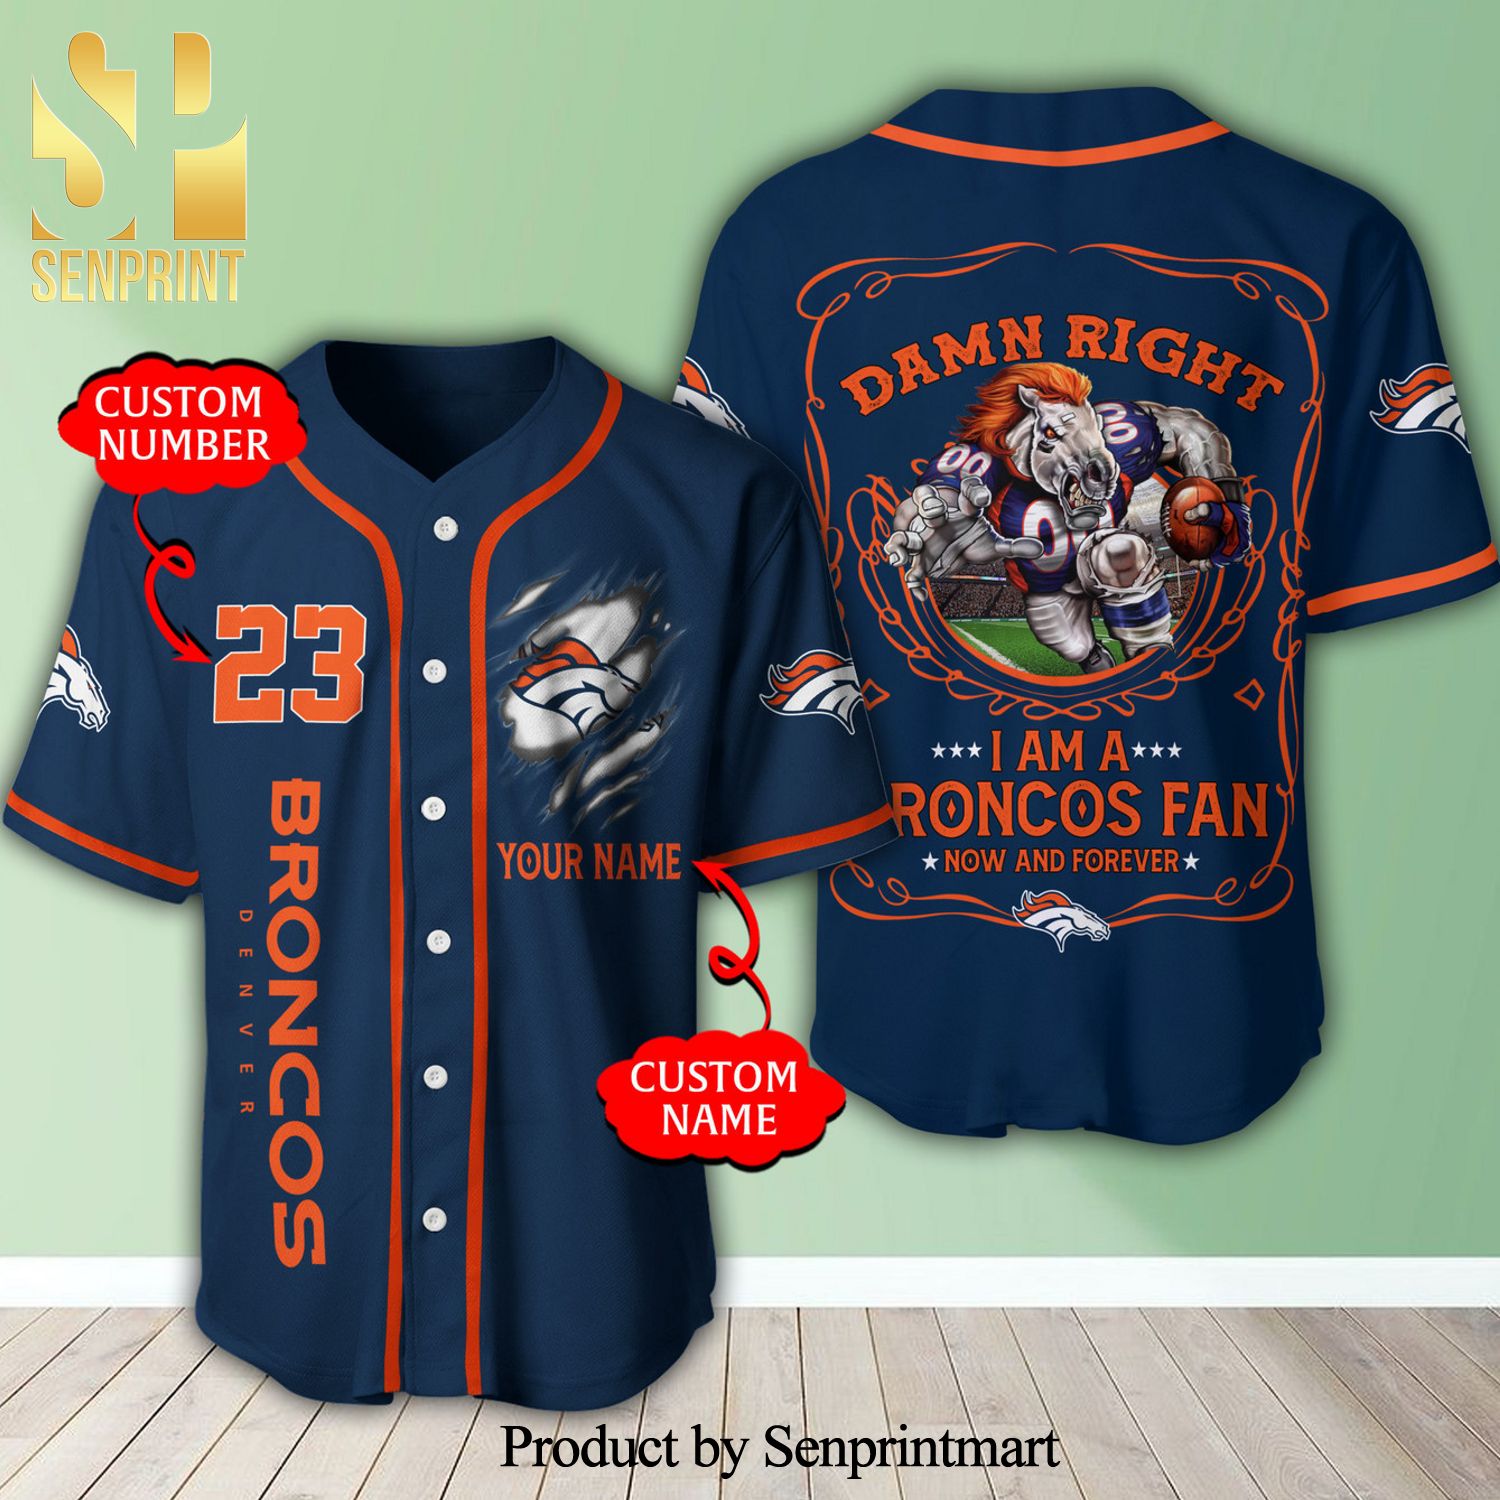 Personalized I Am A Denver Broncos Fan Full Printing Baseball Jersey – Navy